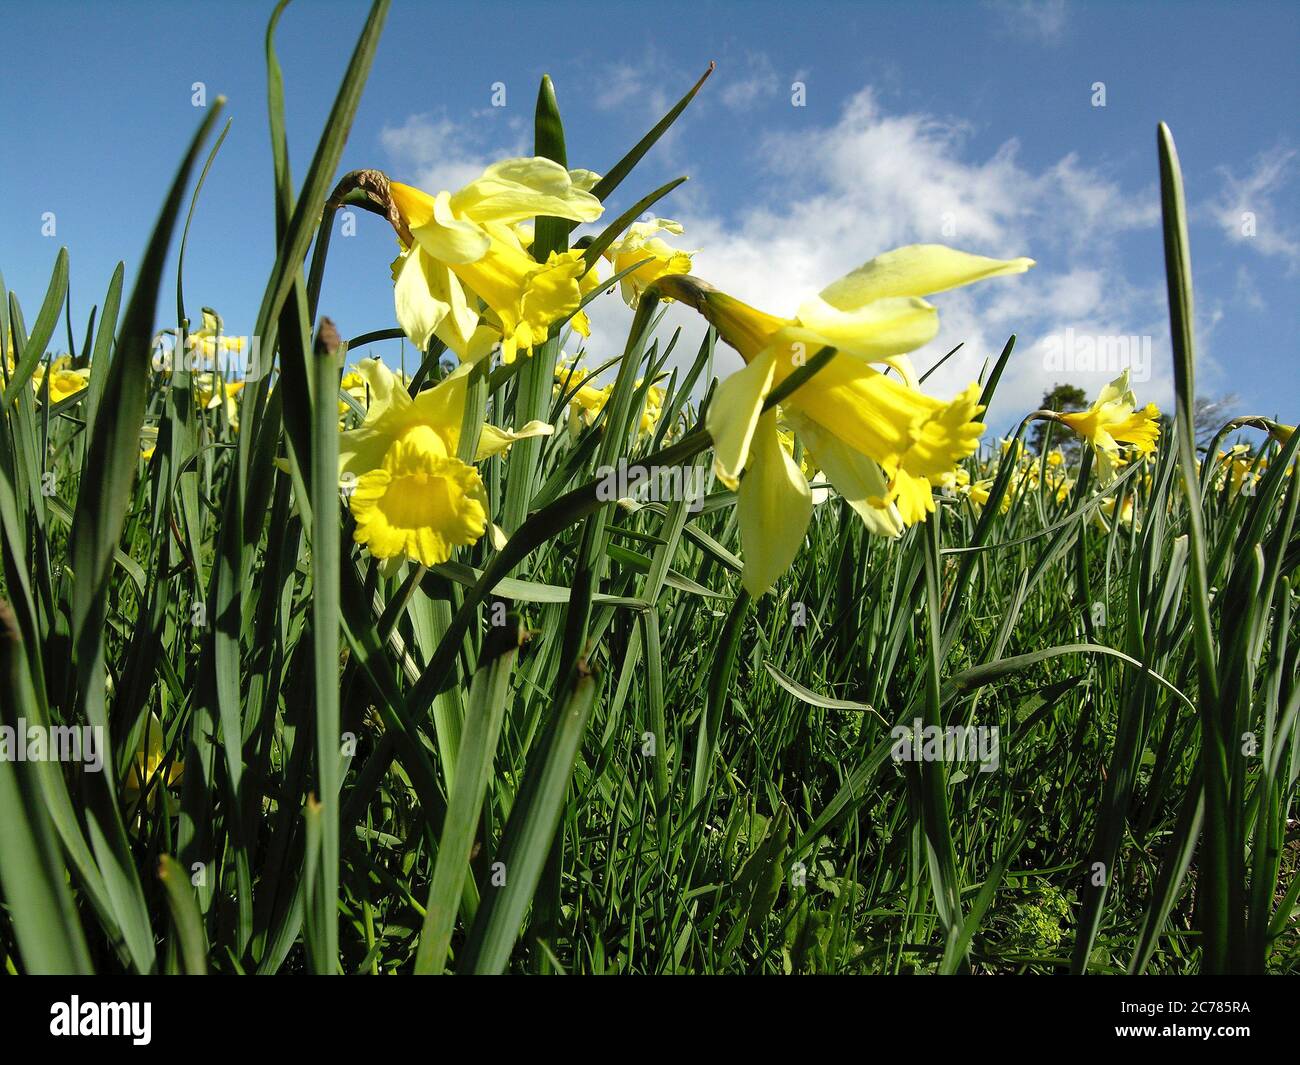 Daffodils (Narcissus pseudonarcissus) in a meadow, Cezallier, Puy de Dome, Auvergne, France Stock Photo